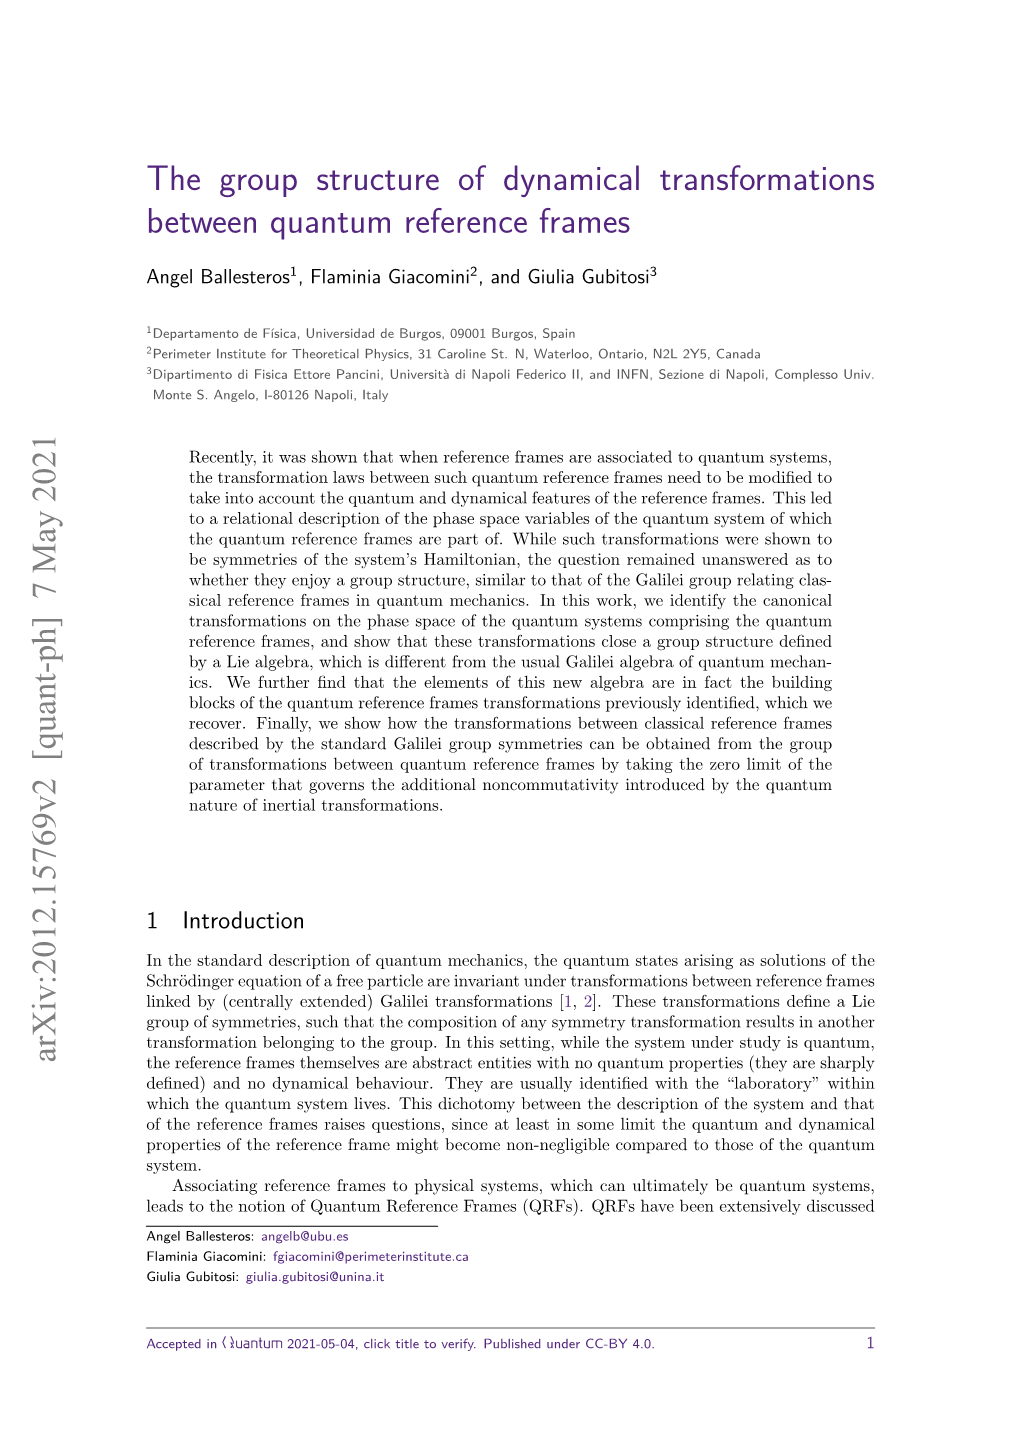 The Group Structure of Dynamical Transformations Between Quantum Reference Frames